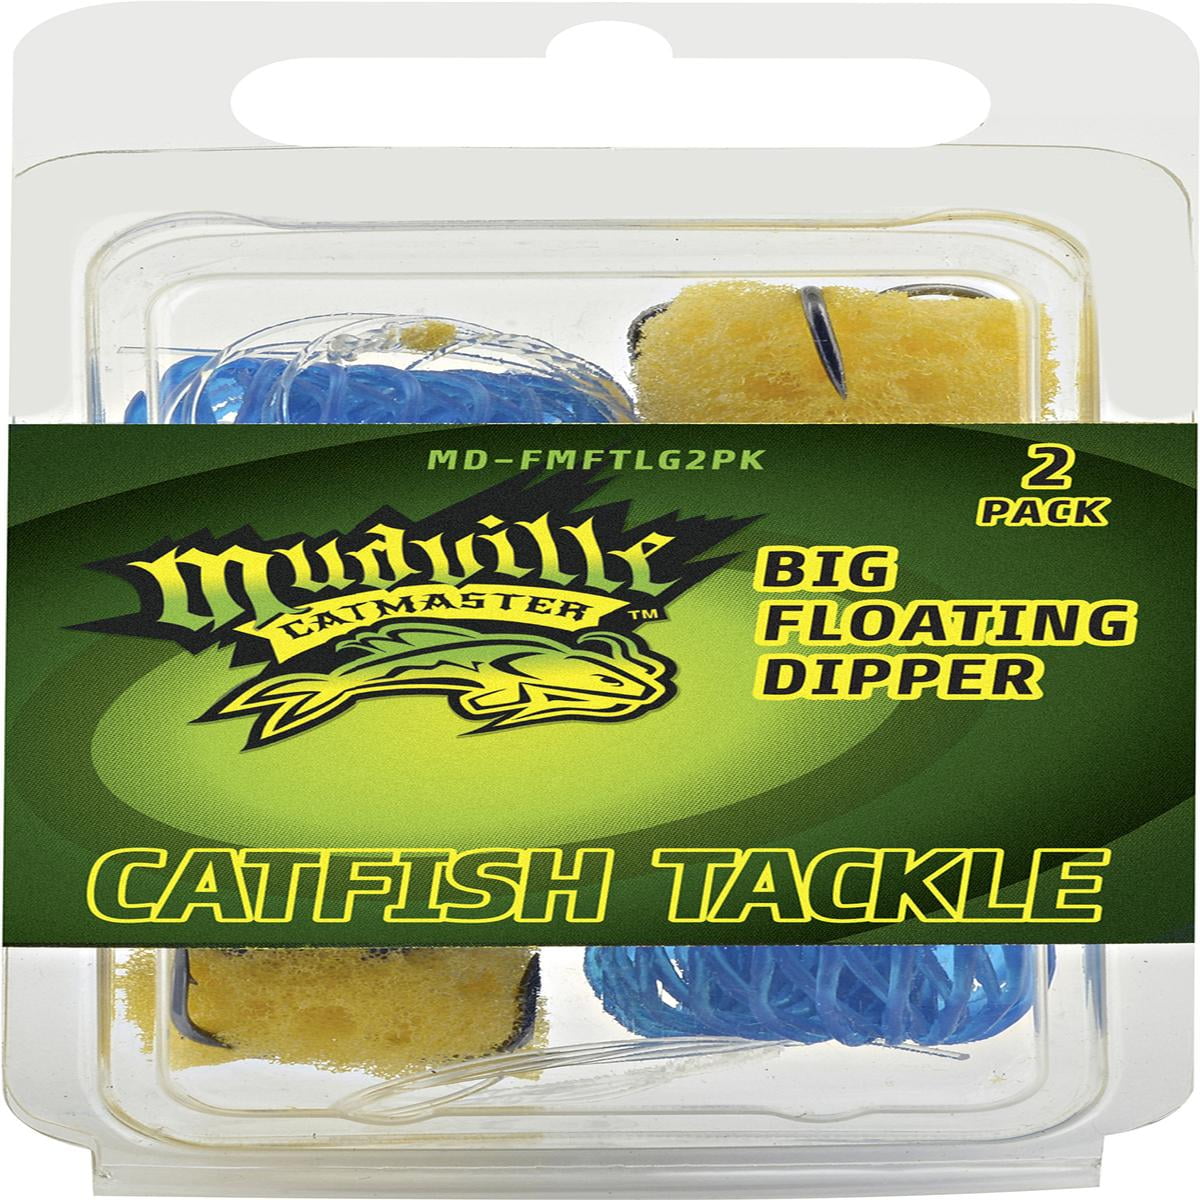 Mudville Catmaster Big Floating Dipper Catfish Fishing Soft